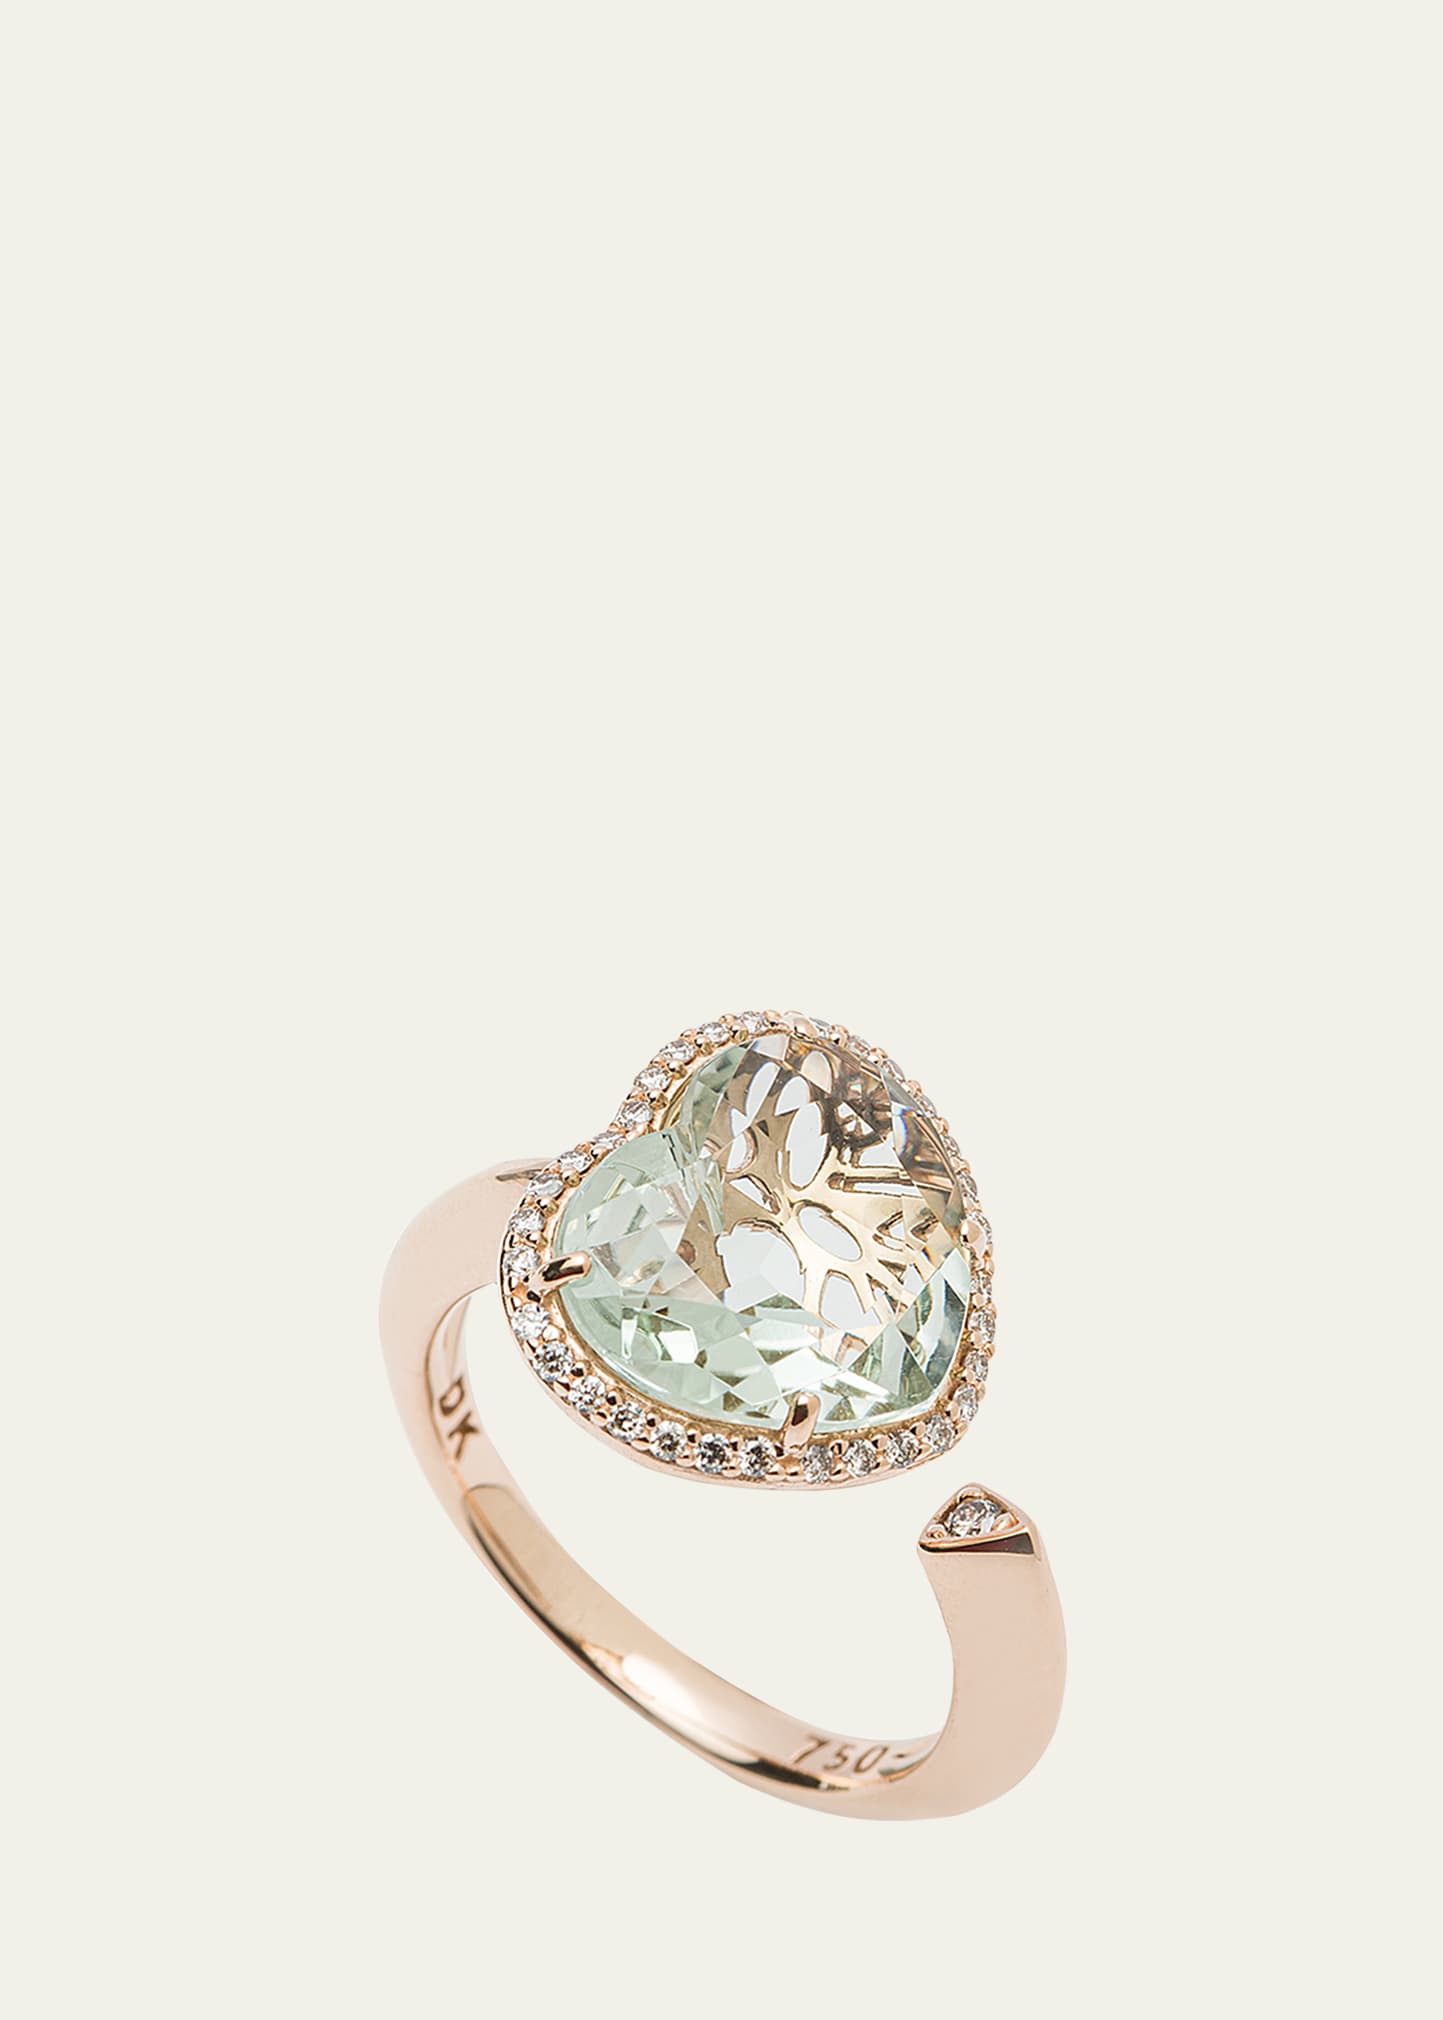 18K Rose Gold Heart Ring with Prasiolite and Diamonds